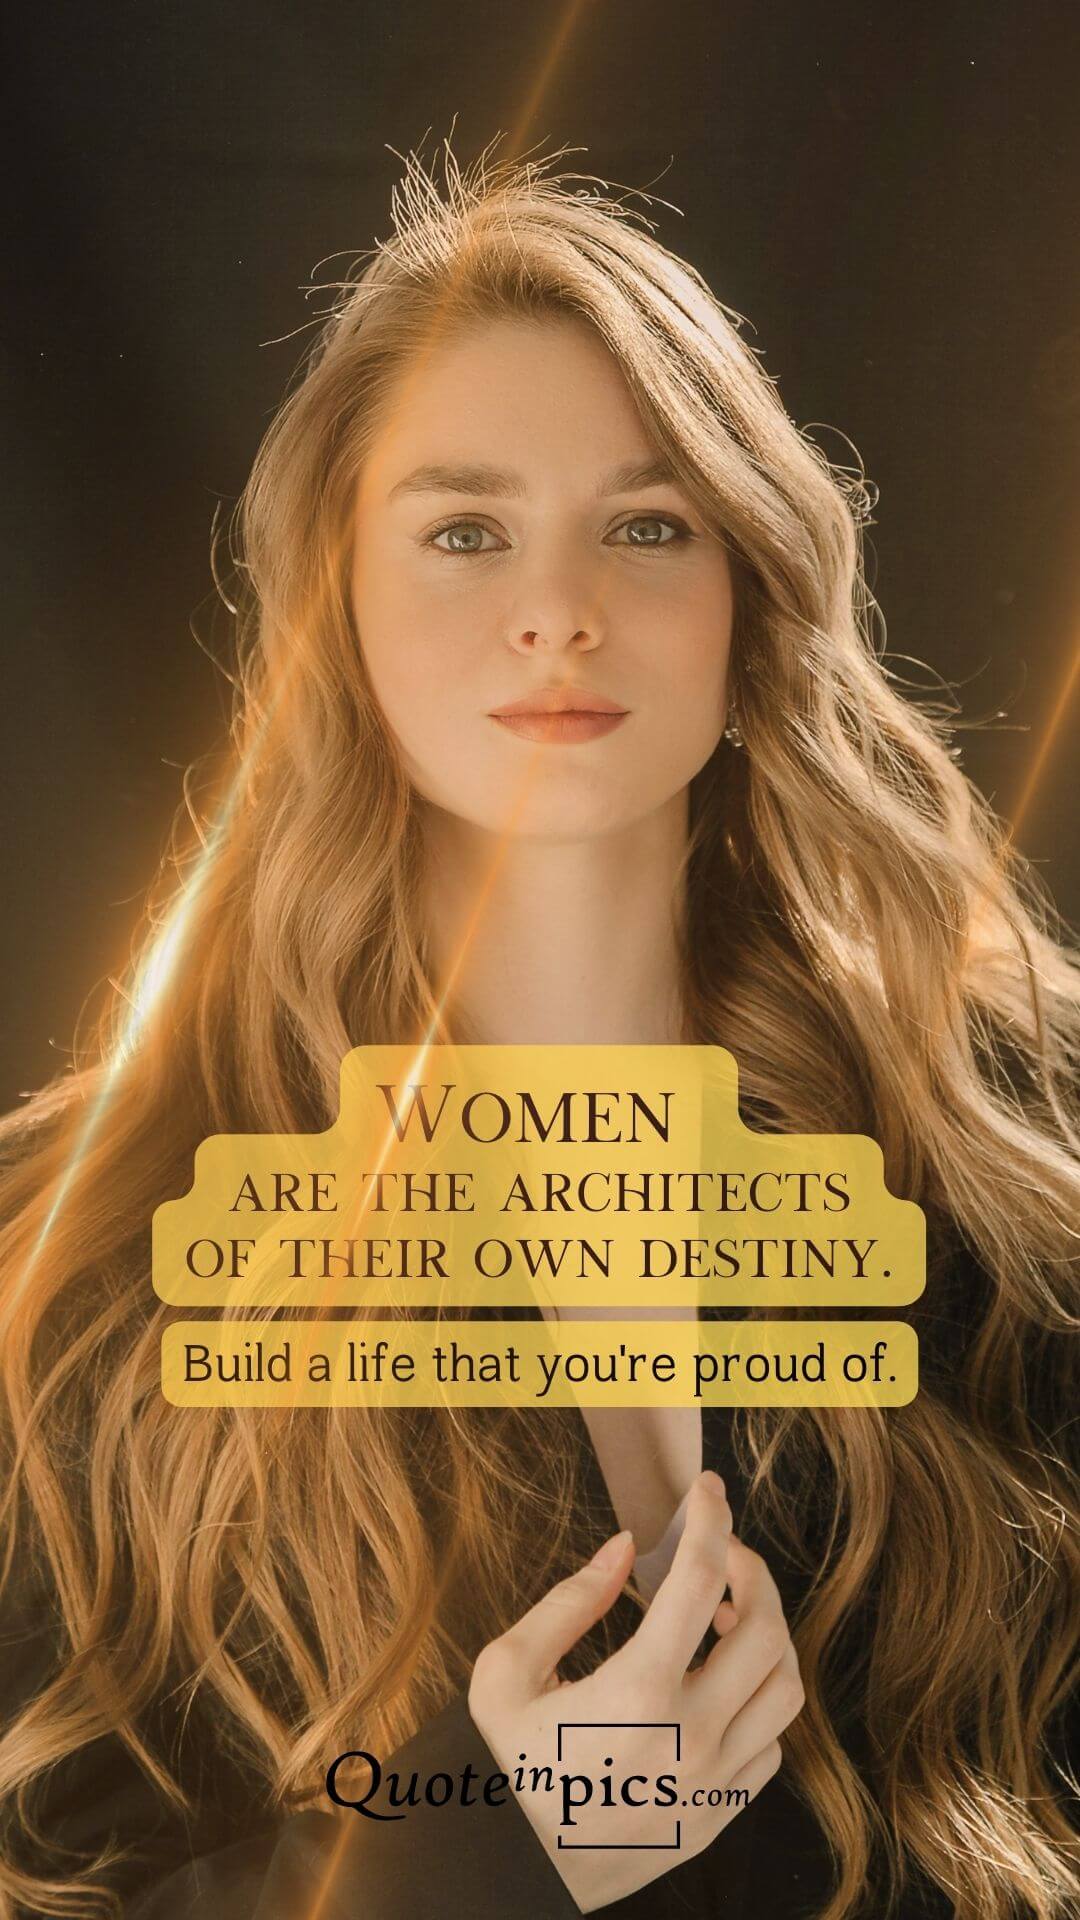 Women are the architects of their own destiny